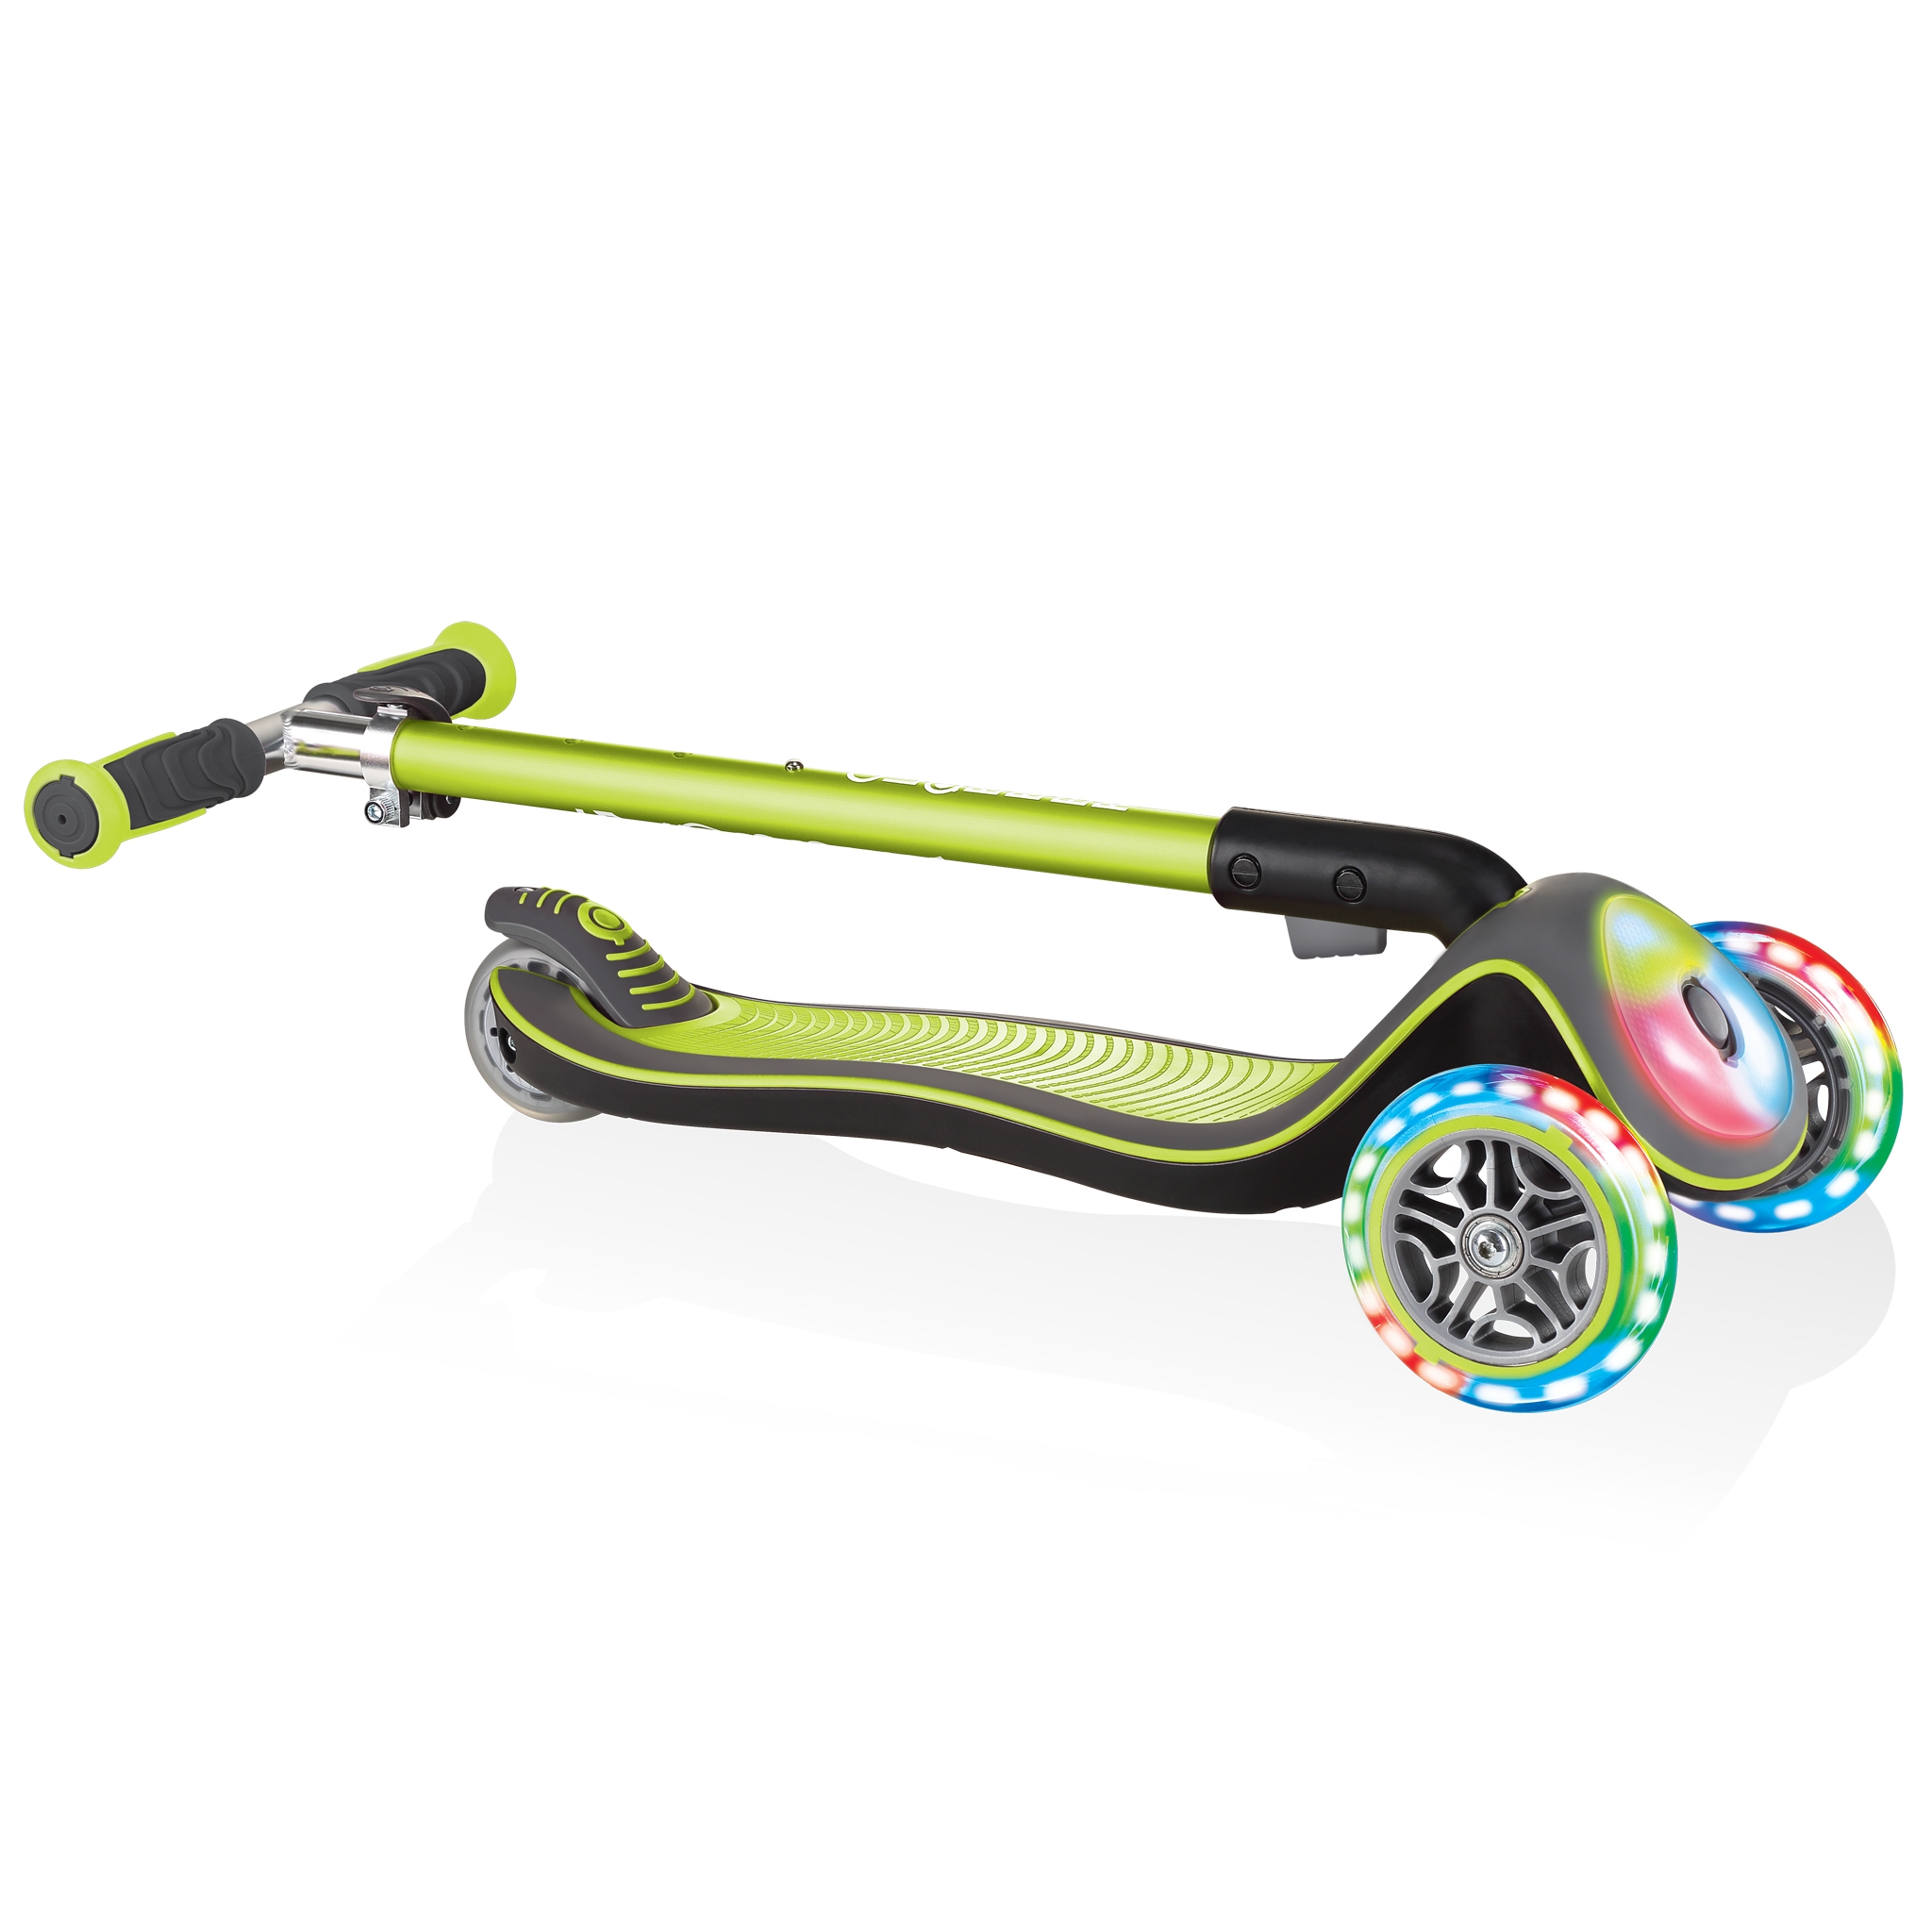 Globber-ELITE-DELUXE-FLASH-LIGHTS-3-wheel-foldable-scooter-for-kids-with-light-up-deck-module-and-wheels-lime-green 4